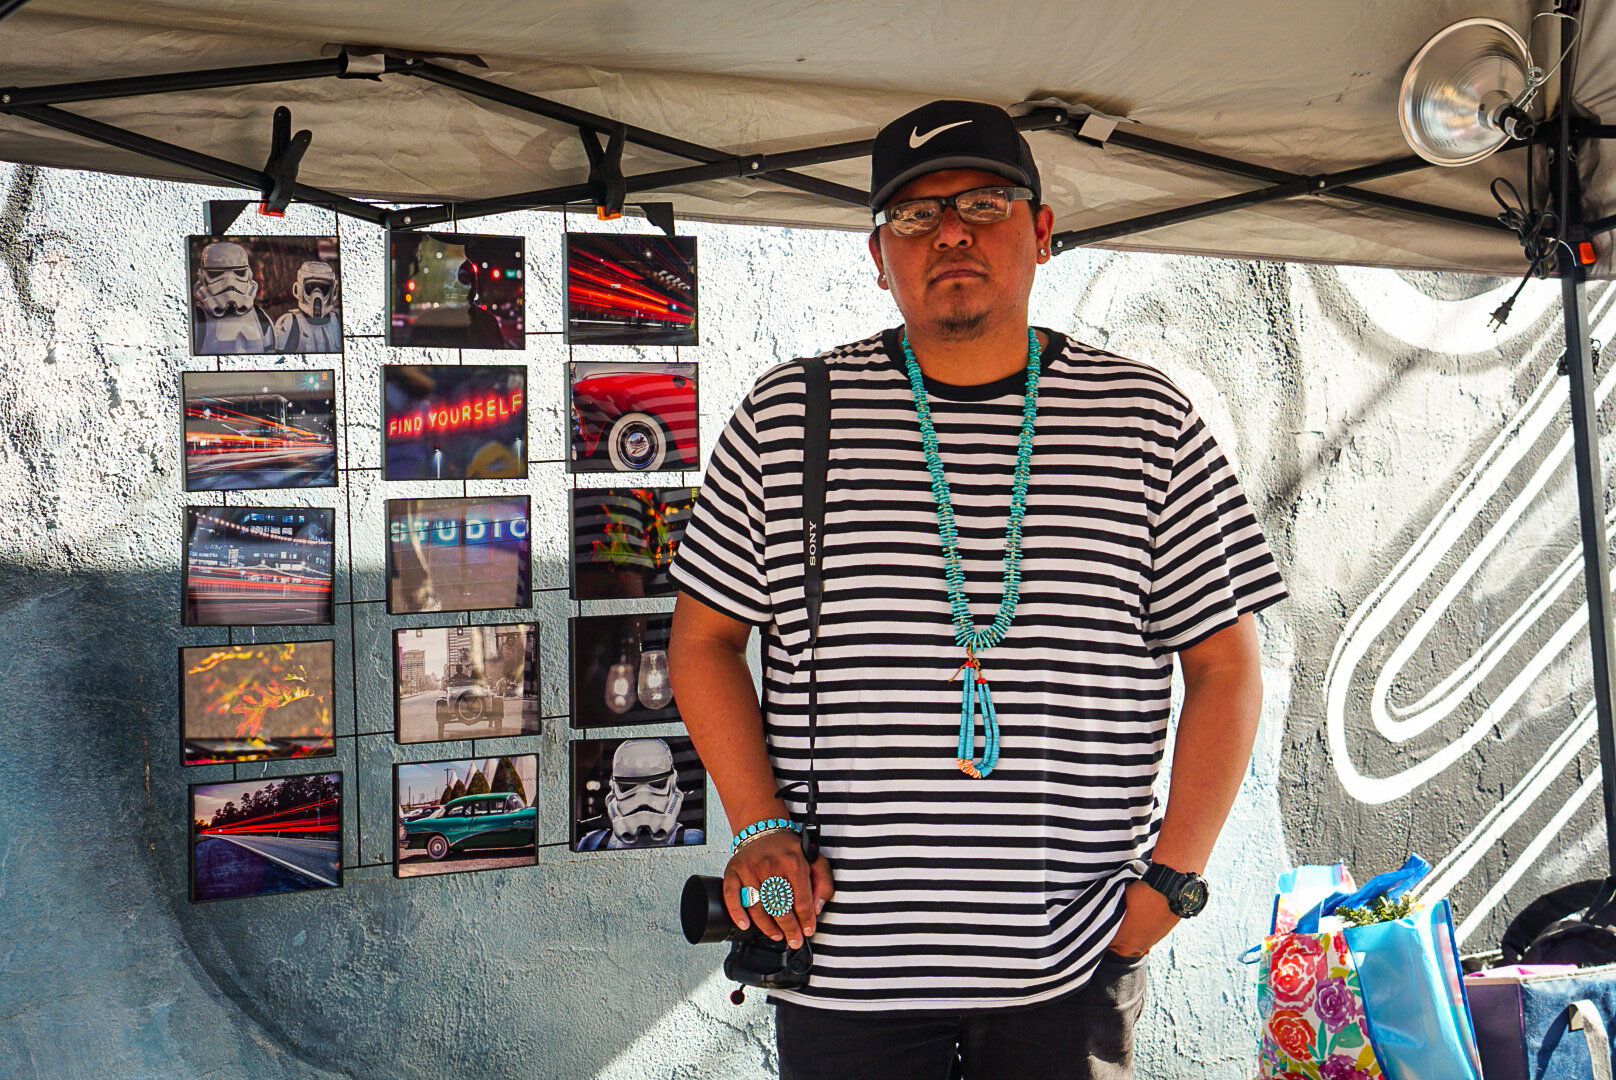 Indigenous Artisan Fest hosted by Roosevelt Row CDC, Indige Design Collab, and S.T.I.L.L. She Lives